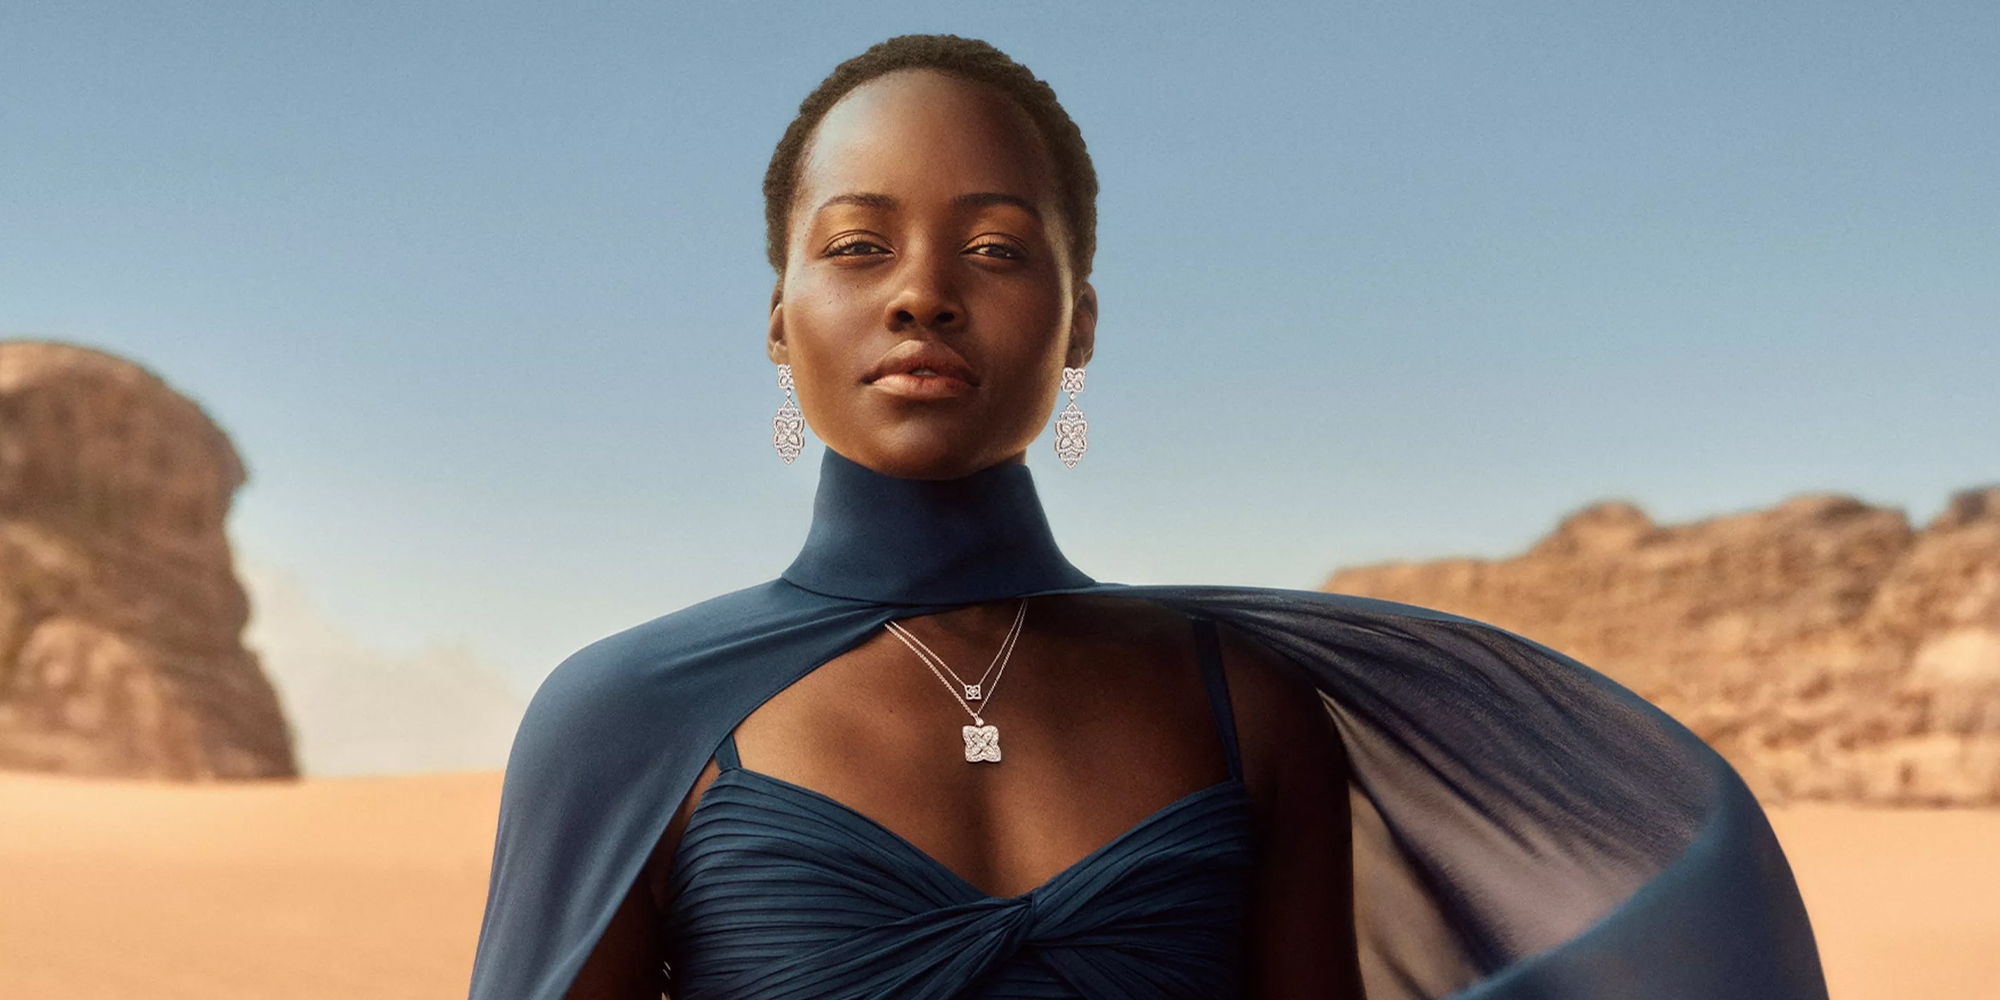 DE BEERS 'WHERE IT BEGINS' CAMPAIGN FILM STARRING LUPITA NYONG'O